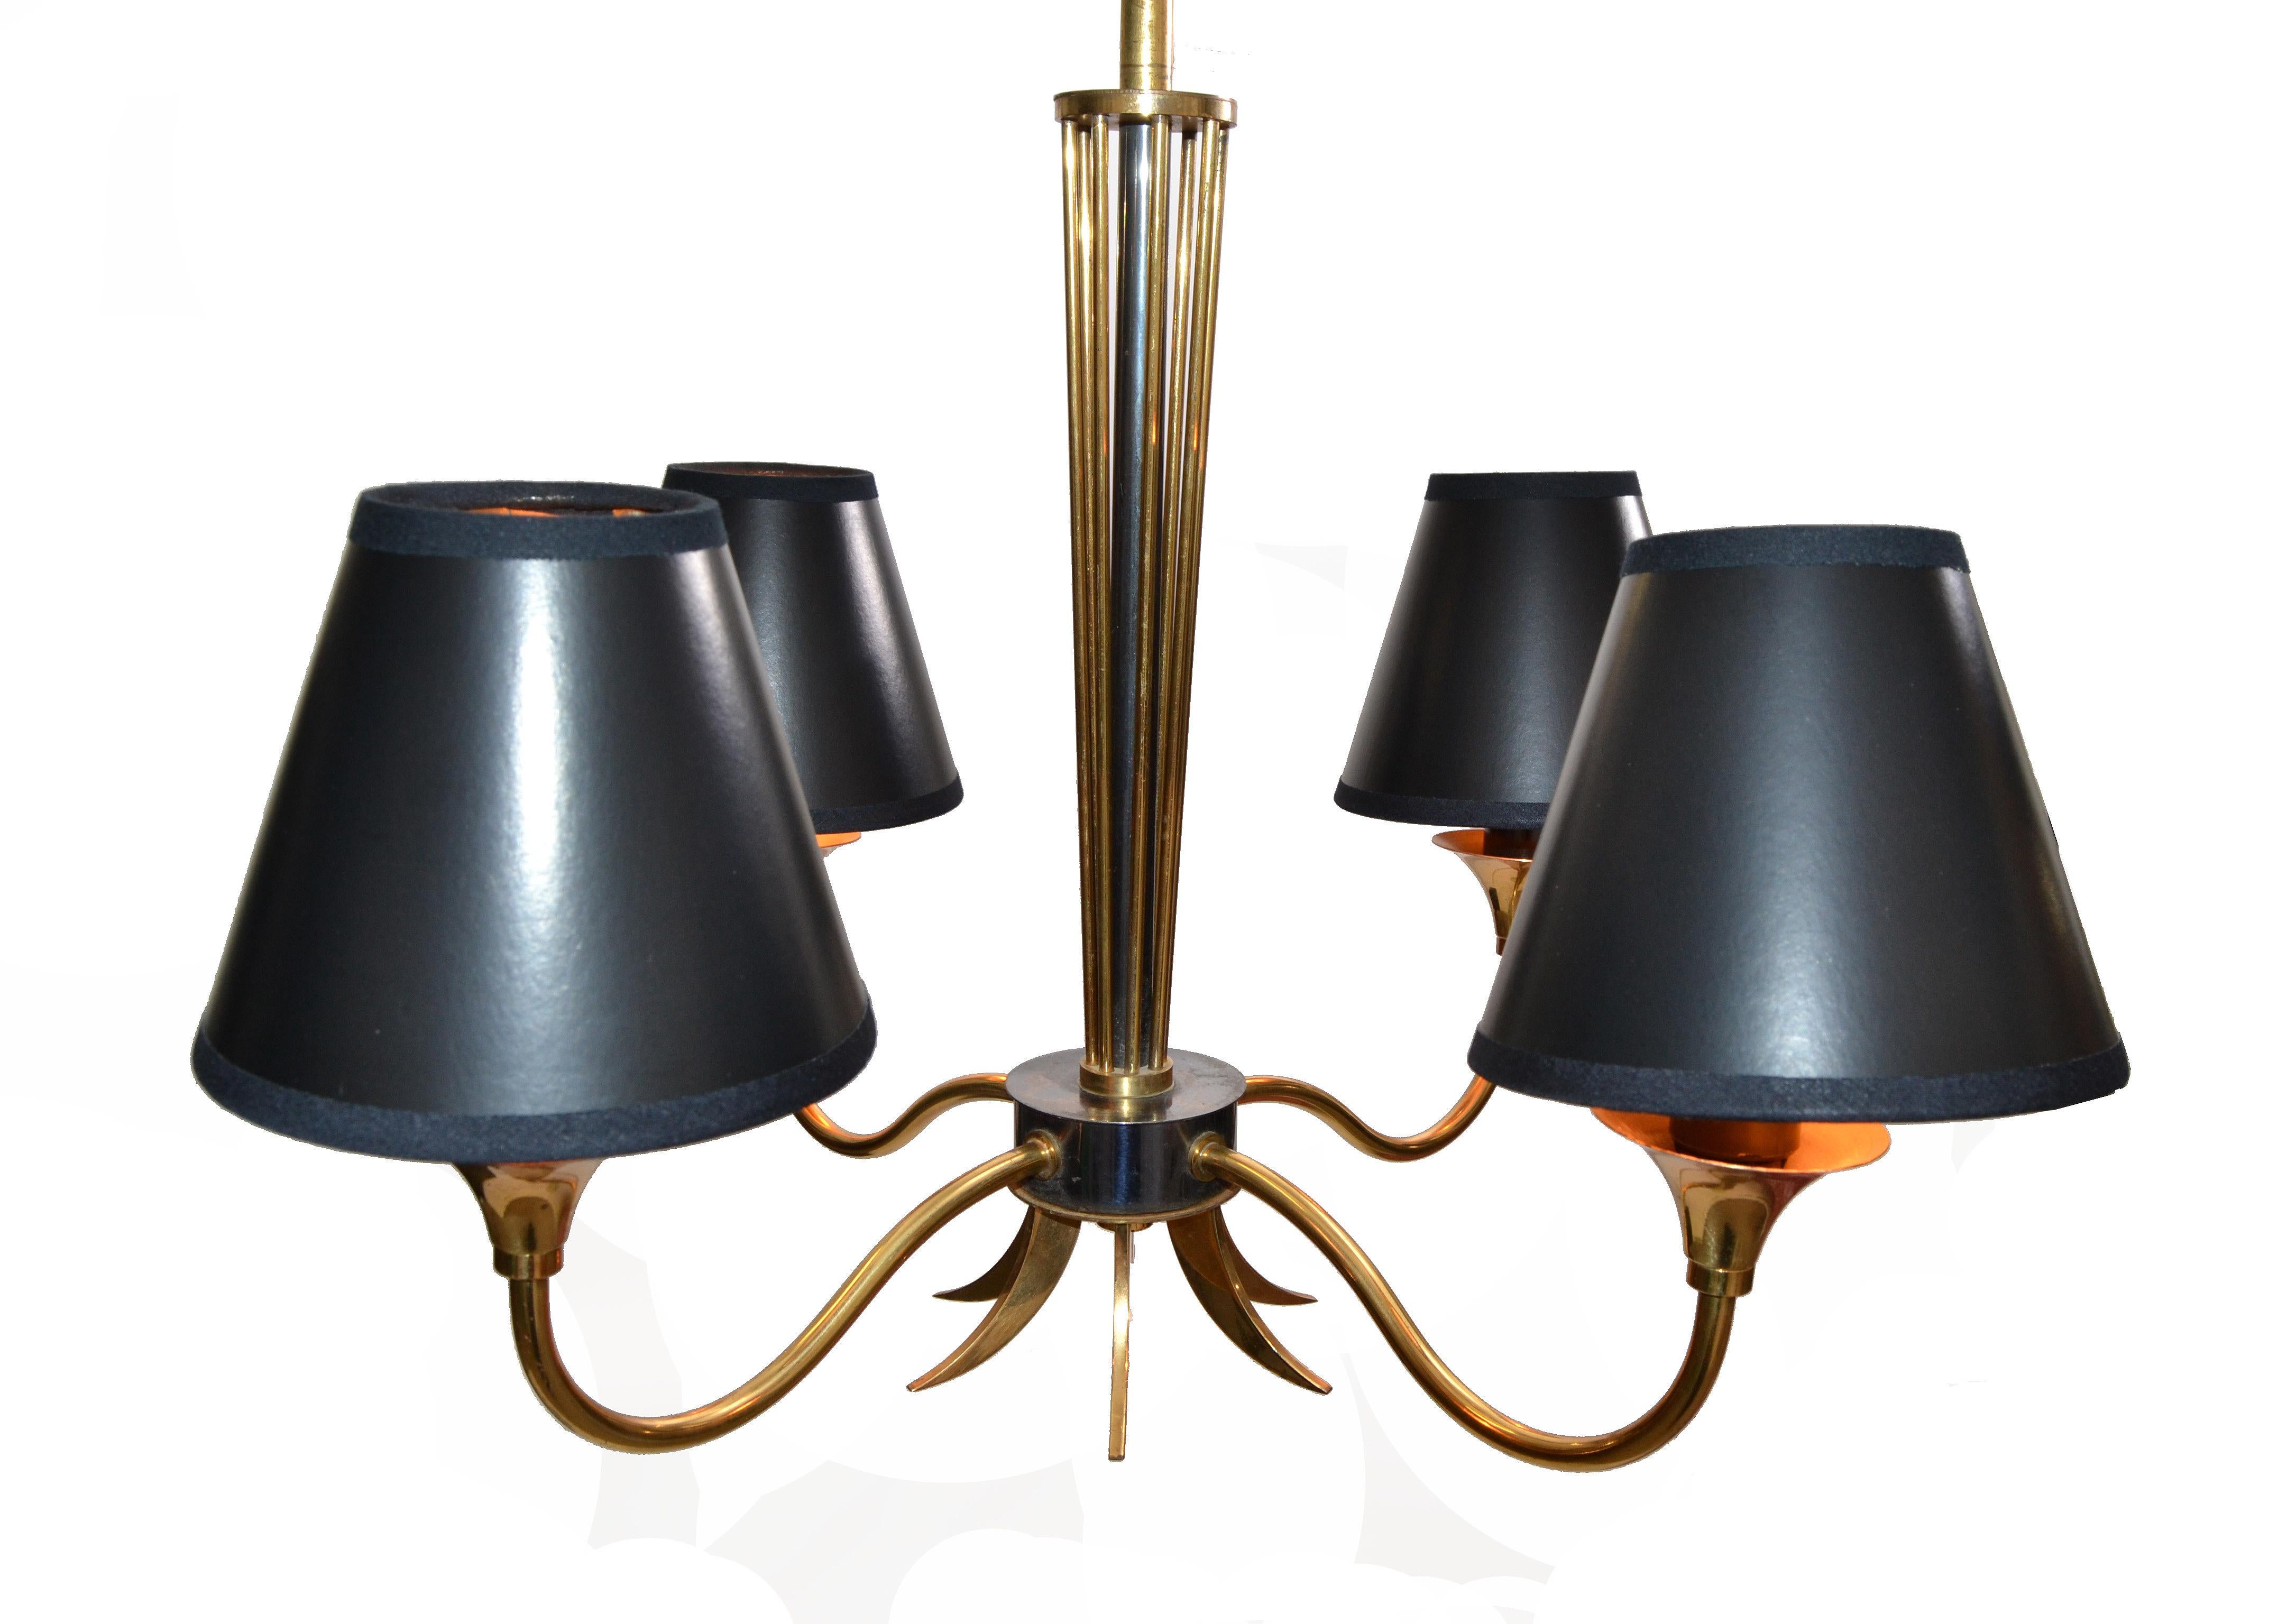 Maison Lunel Four-Light Chandelier Brass and Gun Metal French Mid-Century Modern For Sale 5